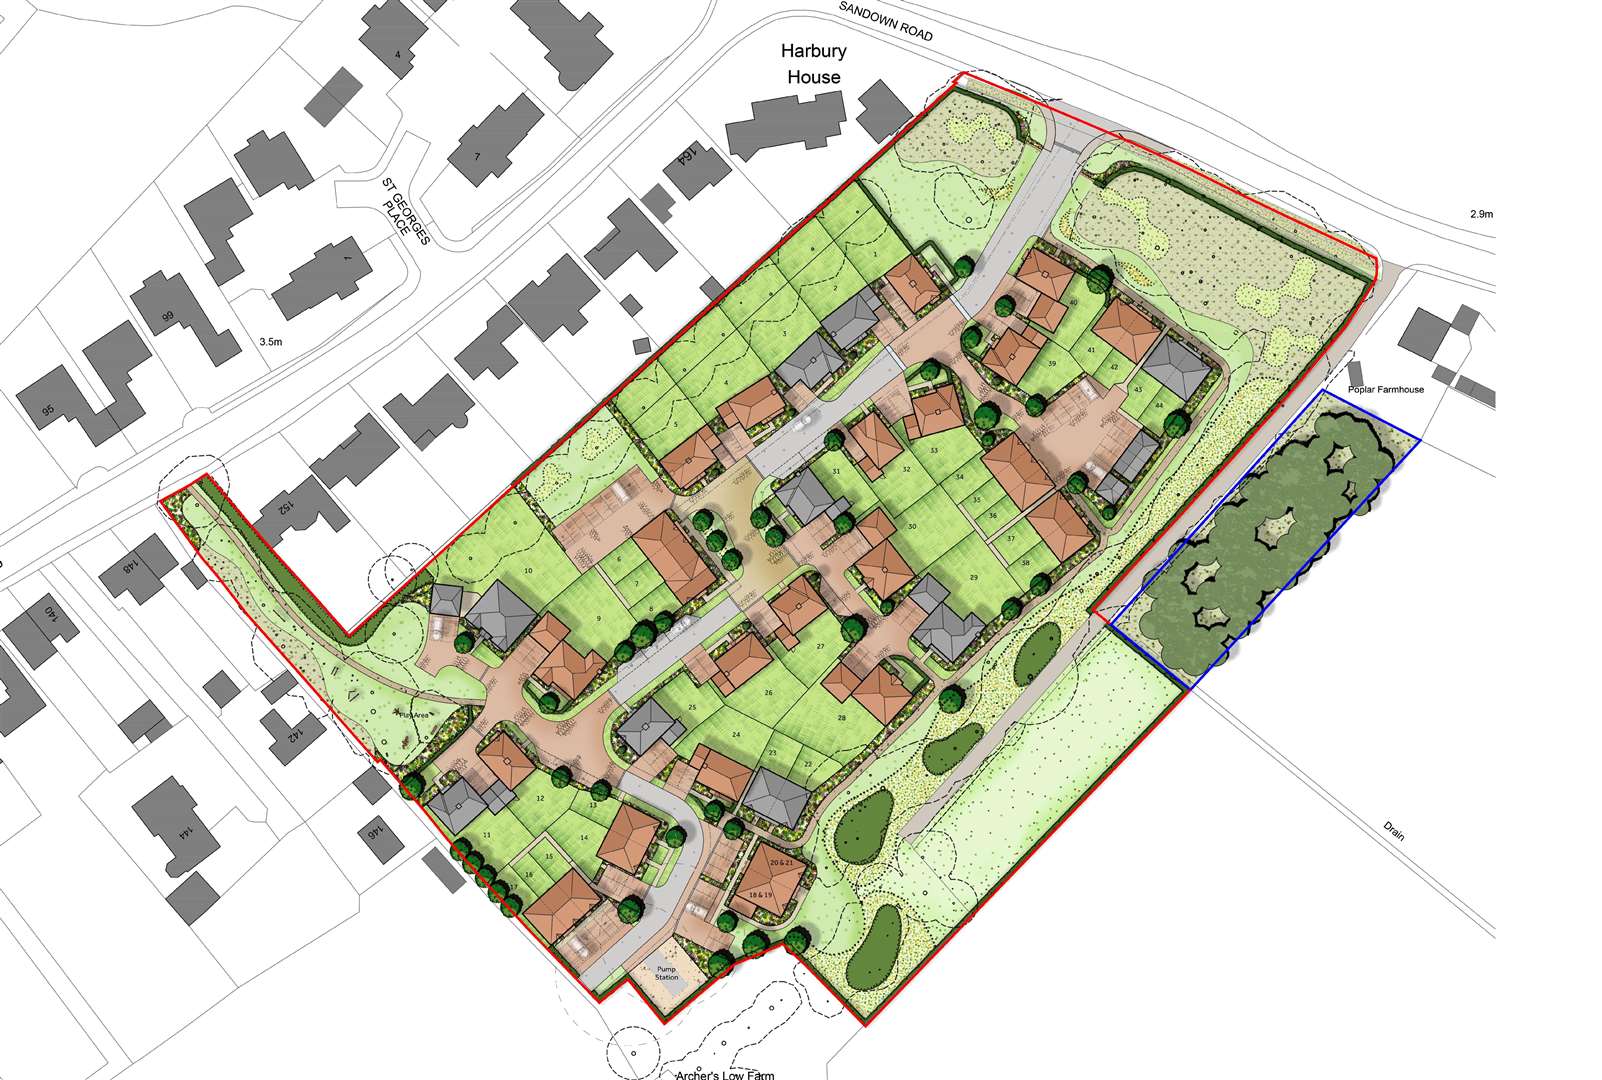 Fernham Homes has amended its proposal from 46 to 44 homes on land at Archers Low Farm in Sandwich